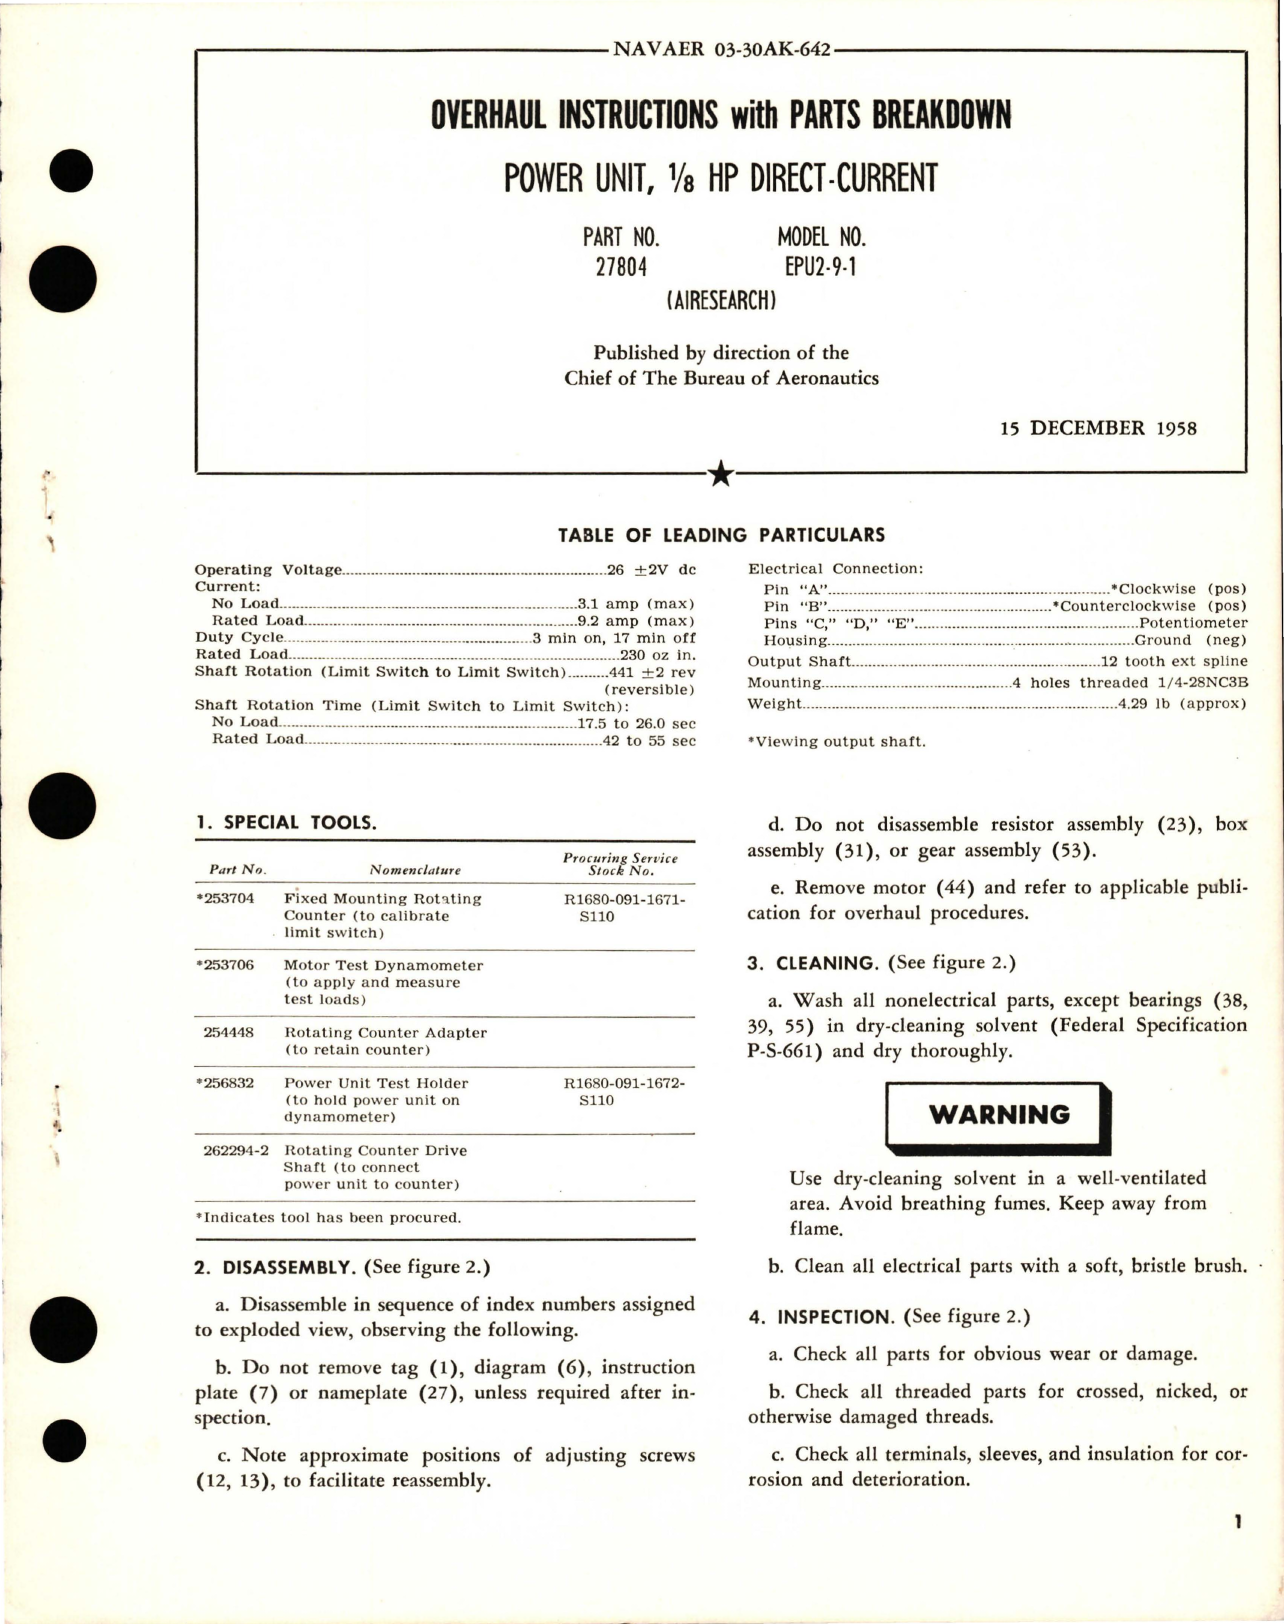 Sample page 1 from AirCorps Library document: Overhaul Instructions with Parts Breakdown for Direct Current Power Unit - 1-8 HP - Part 27804 - Model EPU2-9-1